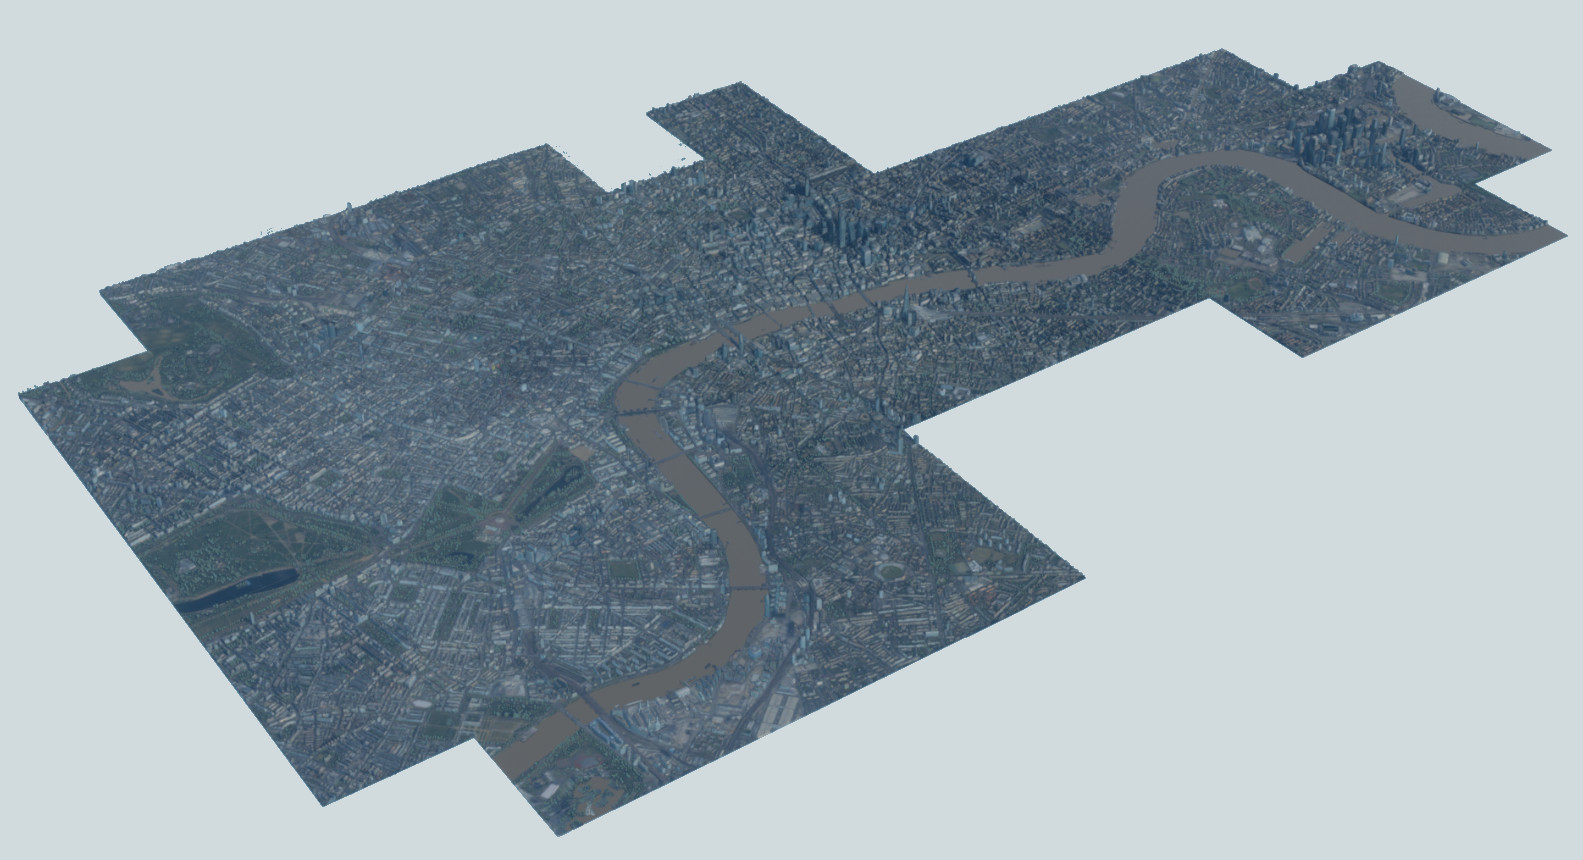 Easy to use Textured 3D city model of London.